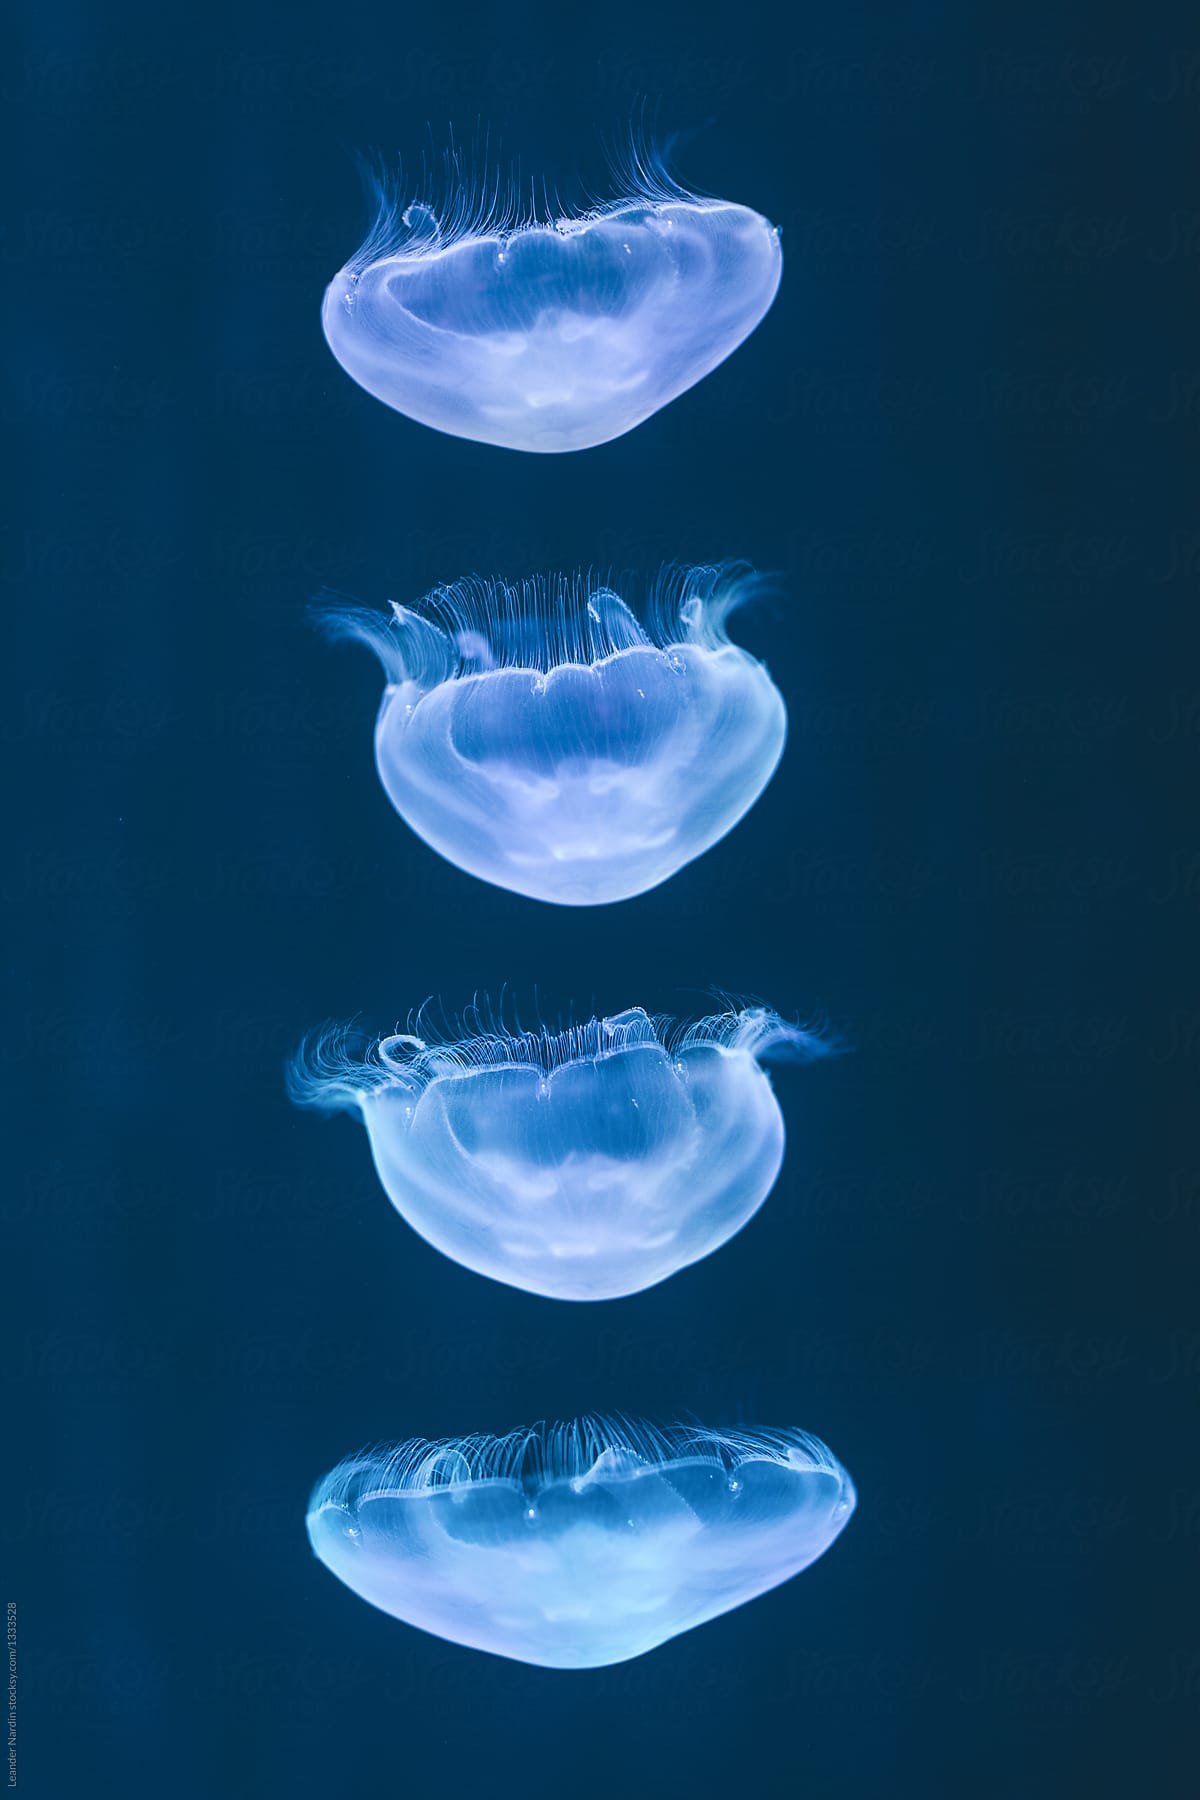 series of a moving jelly fish glowing blue